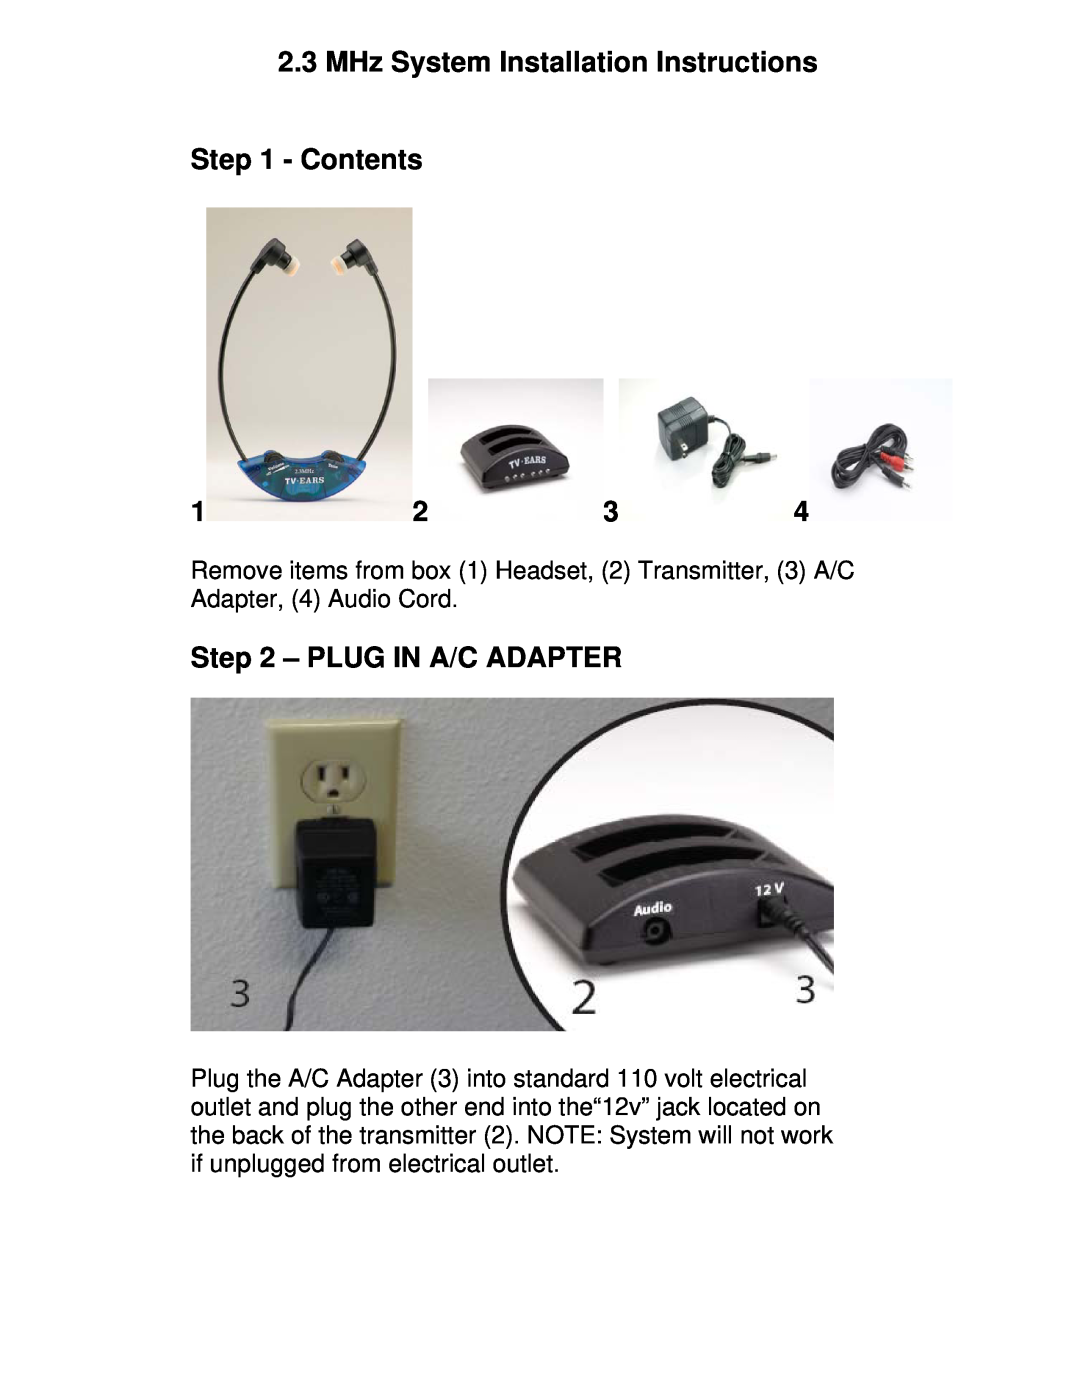 TV Ears Headset System installation instructions 2.3MHz System Installation Instructions, Contents, Plug In A/C Adapter 